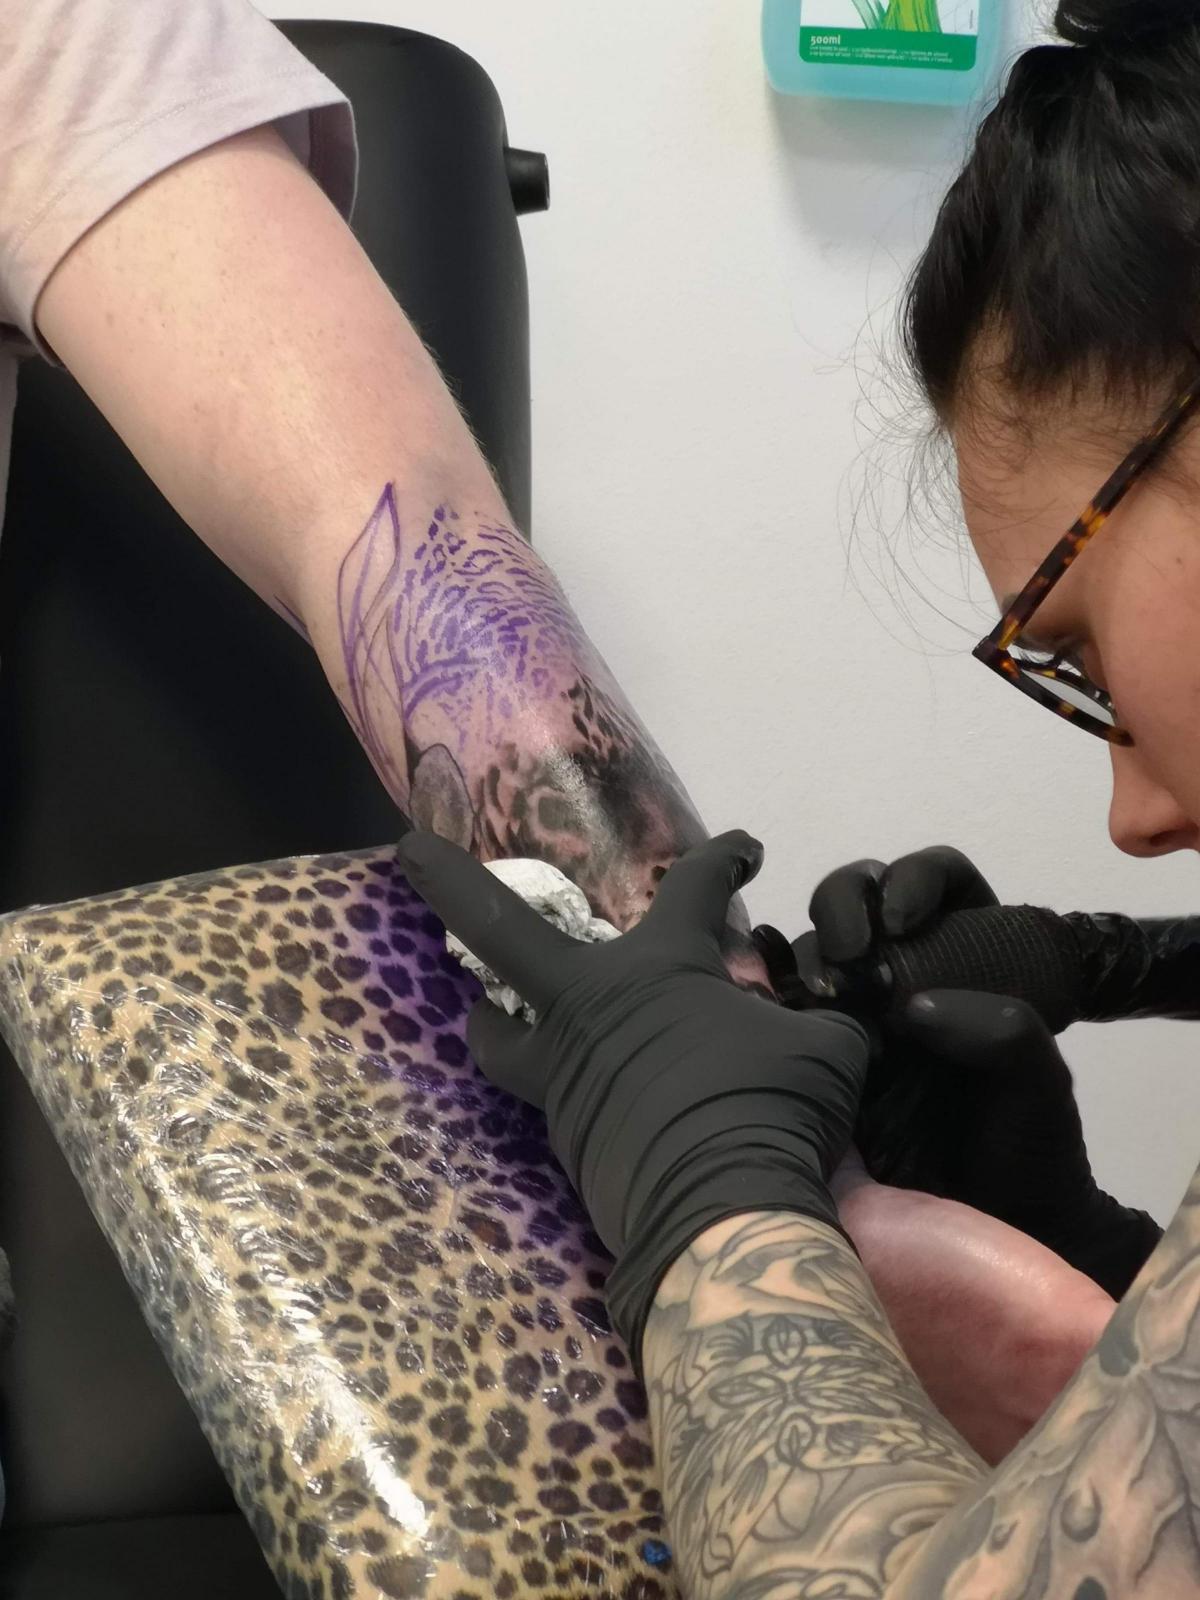 Tattoo day to raise money for Endometriosis UK charity | Keighley News